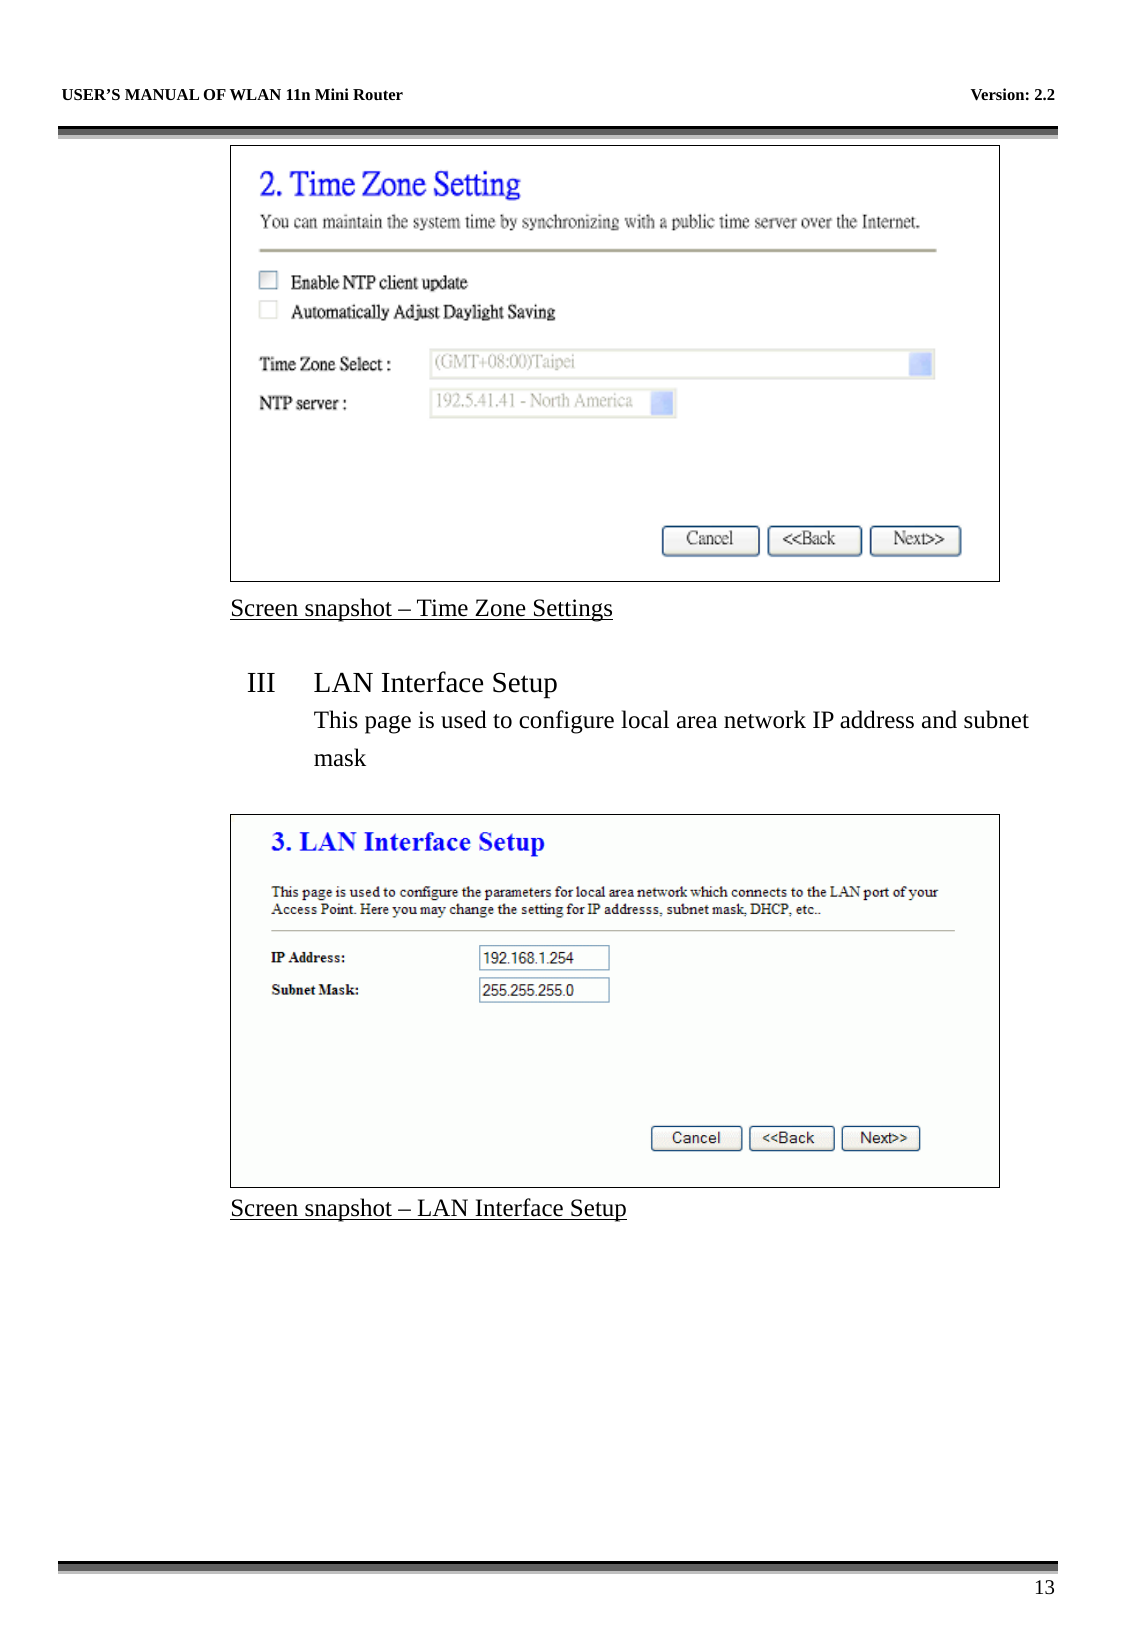   USER’S MANUAL OF WLAN 11n Mini Router    Version: 2.2      13  Screen snapshot – Time Zone Settings  III  LAN Interface Setup This page is used to configure local area network IP address and subnet mask   Screen snapshot – LAN Interface Setup 